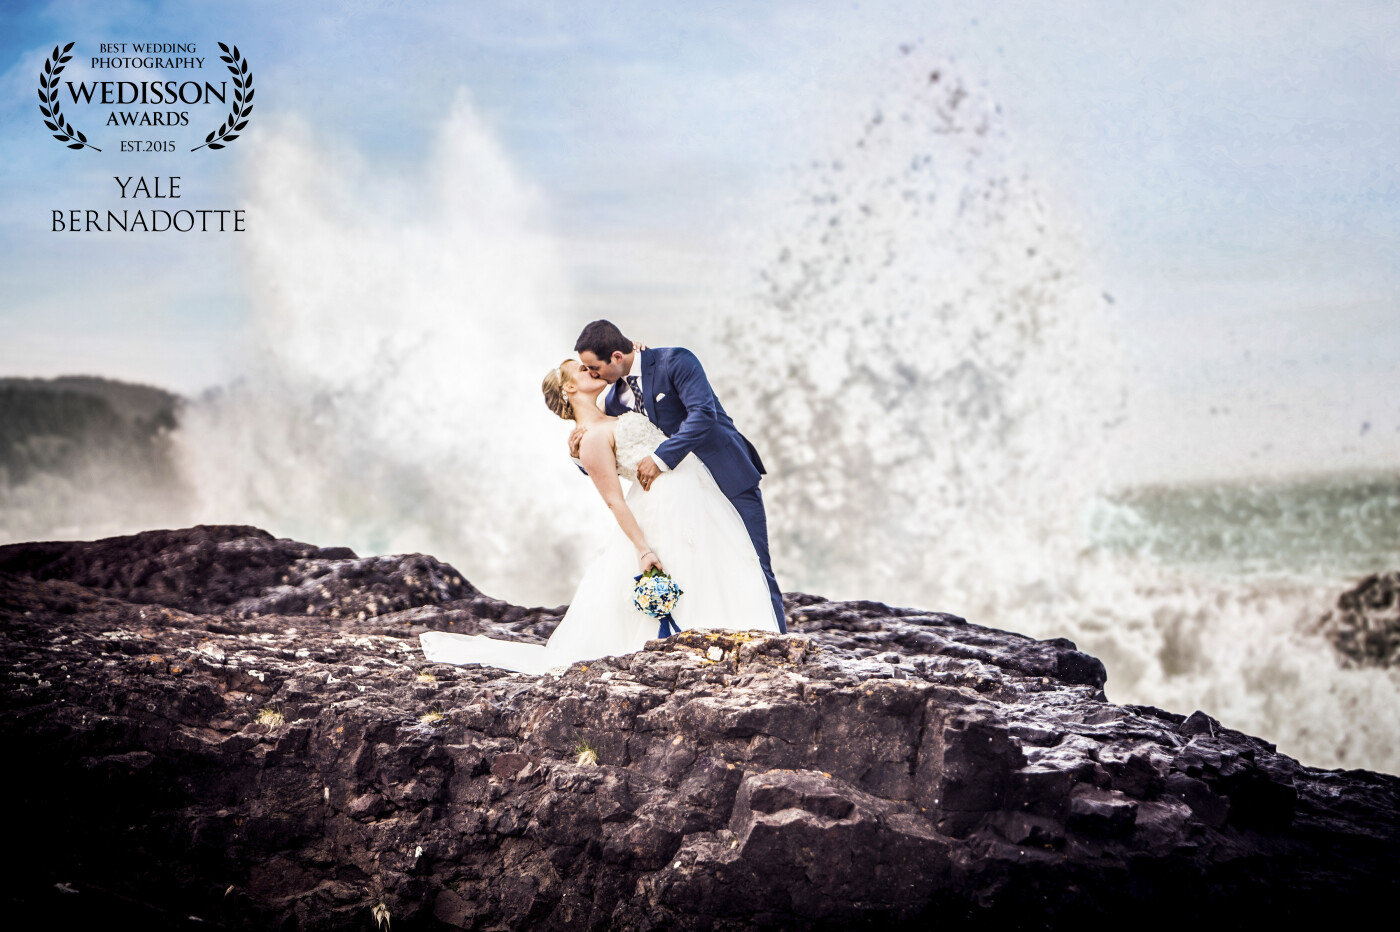 The north shores of Lake Superior are dramatic and breathtaking, constantly showing its' power and beauty. So when the opportunity came to capture this wedding I was excited at the challenge. <br />
<br />
I saw a rock formation jettisoning out from the shoreline and given the wind that was churning up the waters, knew this was the spot for something amazing. I had the couple carefully place themselves as close to the action as possible without putting themselves in too much danger. They knew they would get wet but were excited to hopefully capture the photo I hoped to take. <br />
<br />
I told them that once in place, they needed to hold their pose until I said so as I needed just the right wave sequence to come in. After much patience on their part, the perfect wave hit and this was the result.  